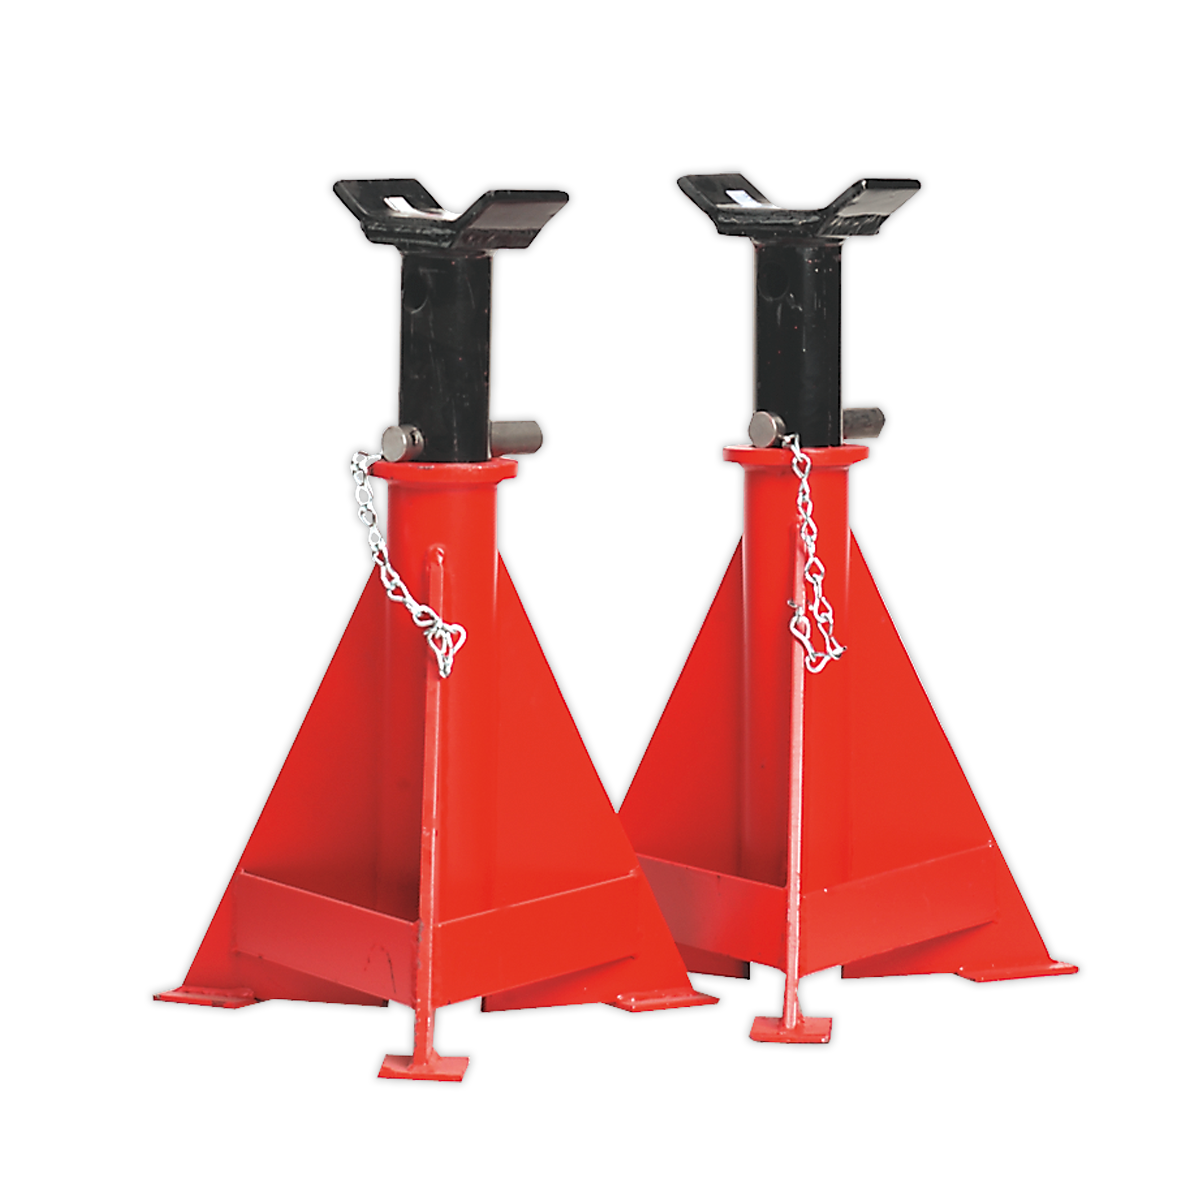 Sealey Axle Stands (Pair) 15 Tonne Capacity per Stand